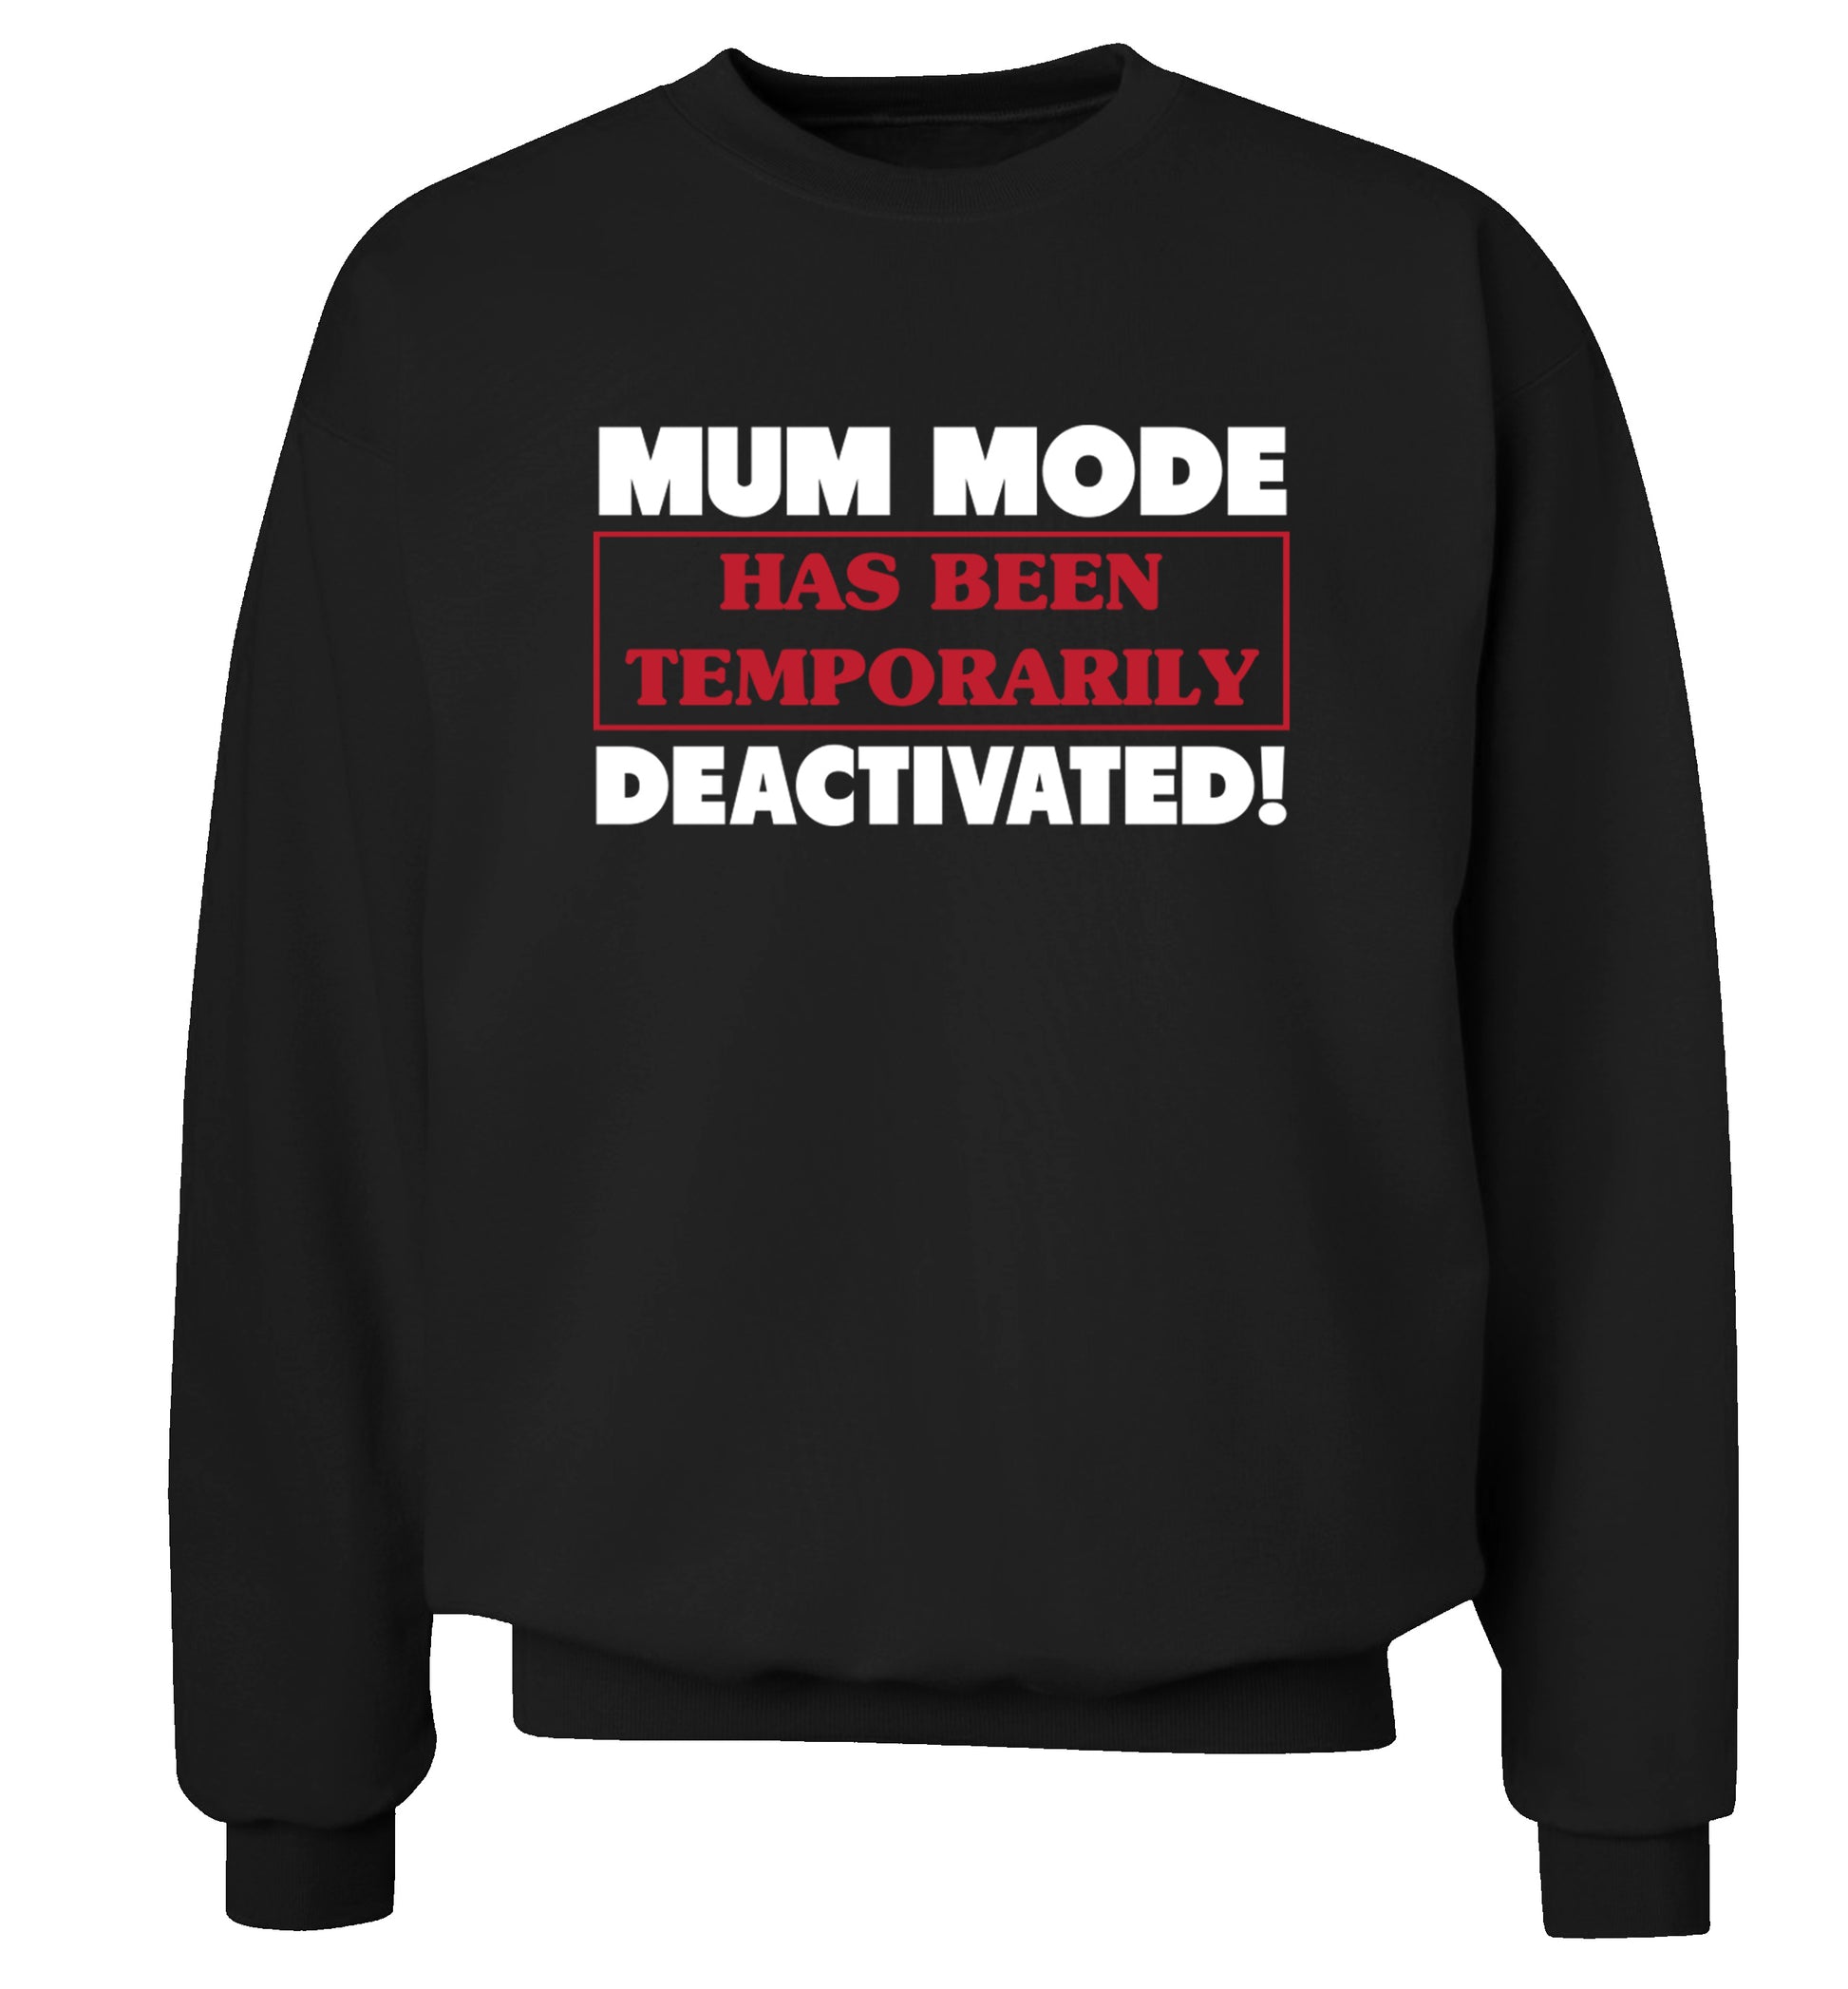 Mum mode has been temporarily deactivated! Adult's unisex black Sweater 2XL